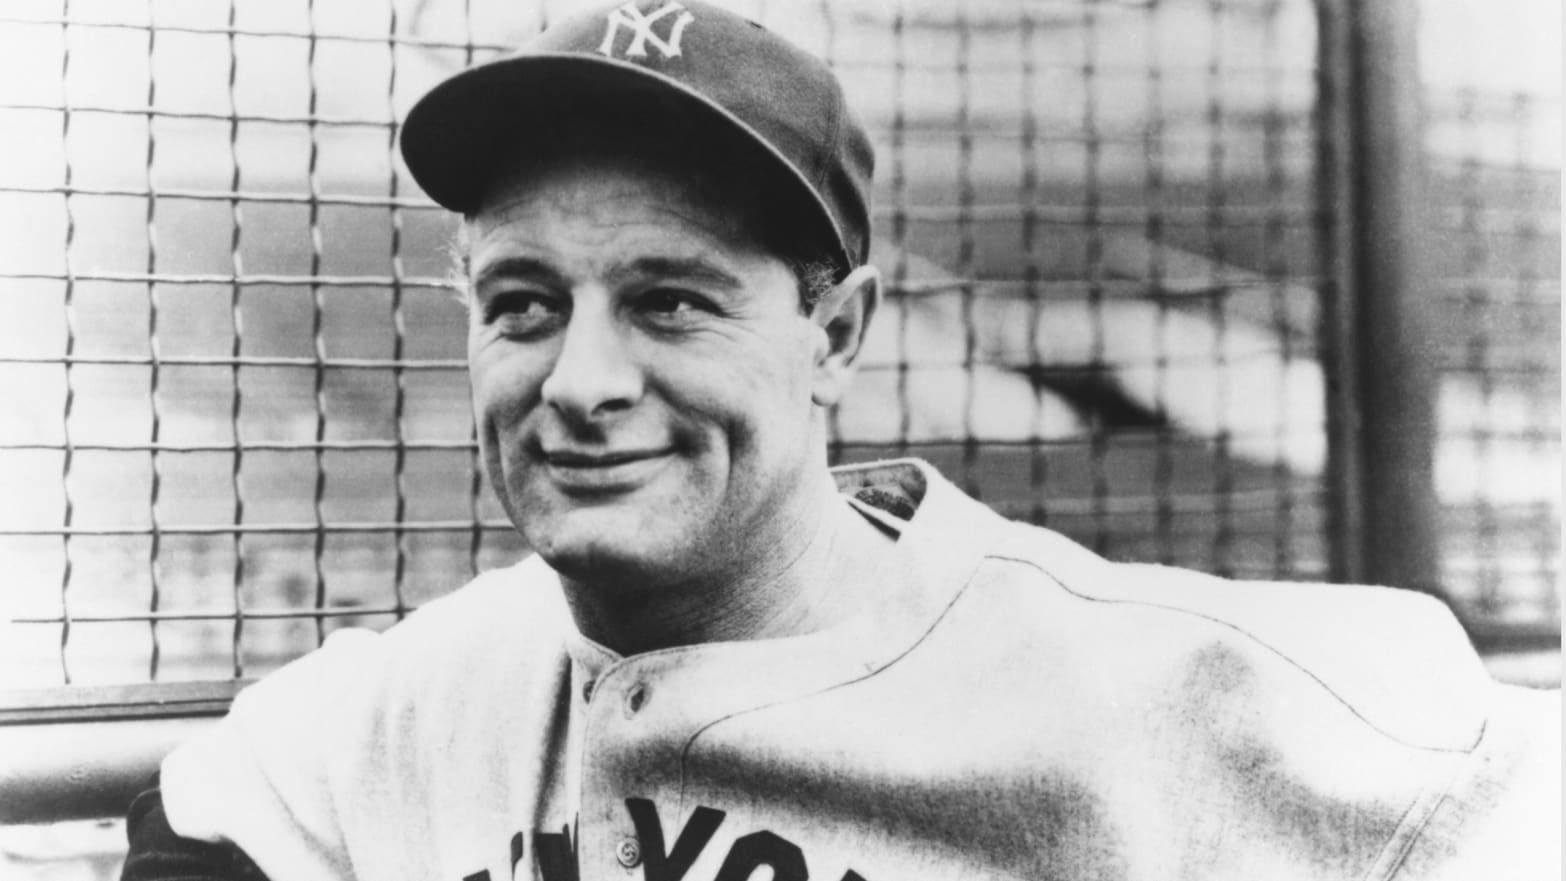 The Day Lou Gehrig Proclaimed Himself 'the Luckiest Man on the